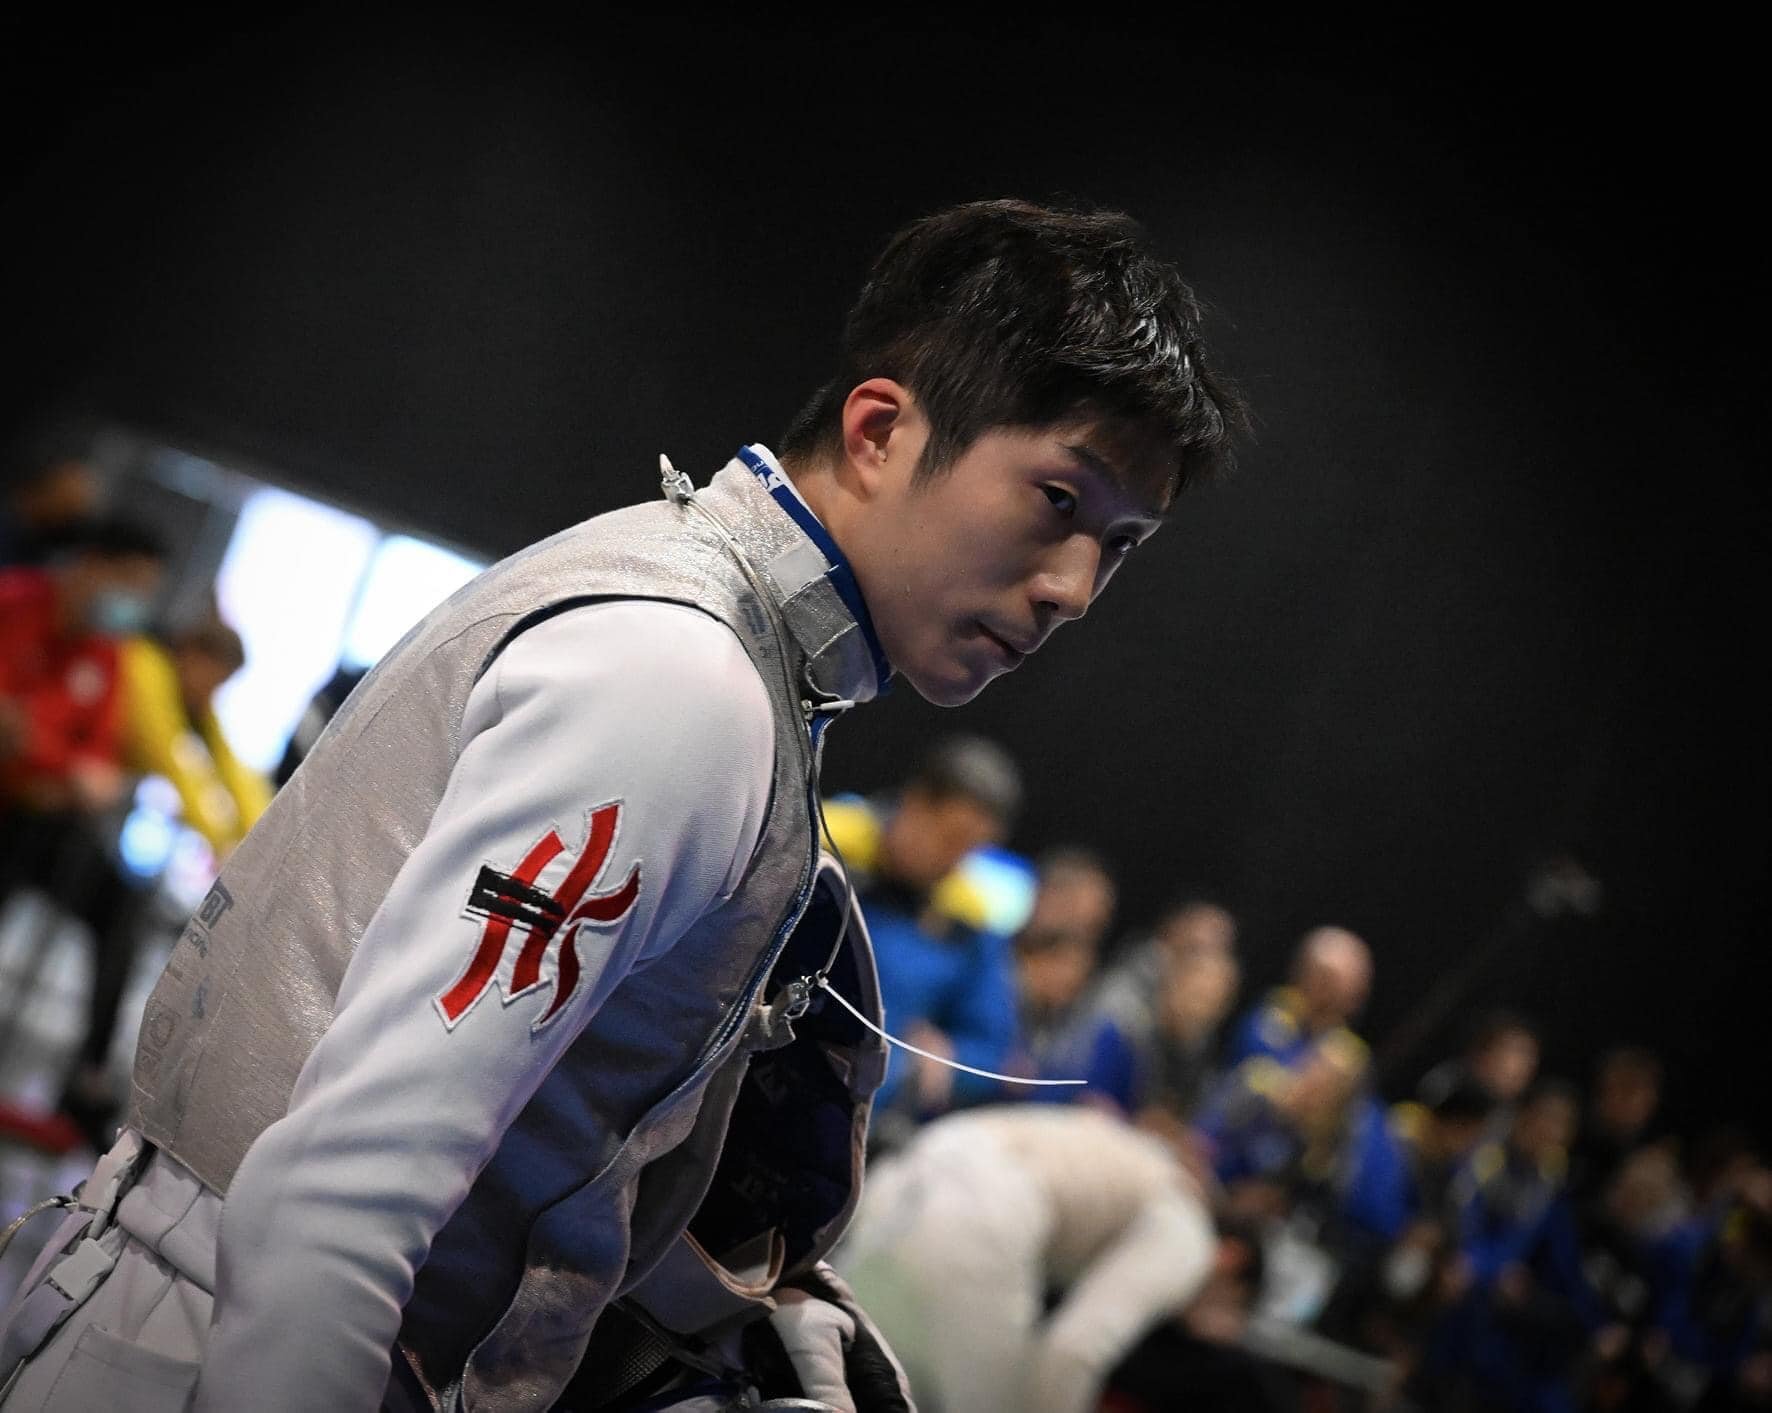 Newly crowned world No 1 Cheung Ka-long finished with a season’s best of fifth at the Belgrade World Cup. Photo: FIE